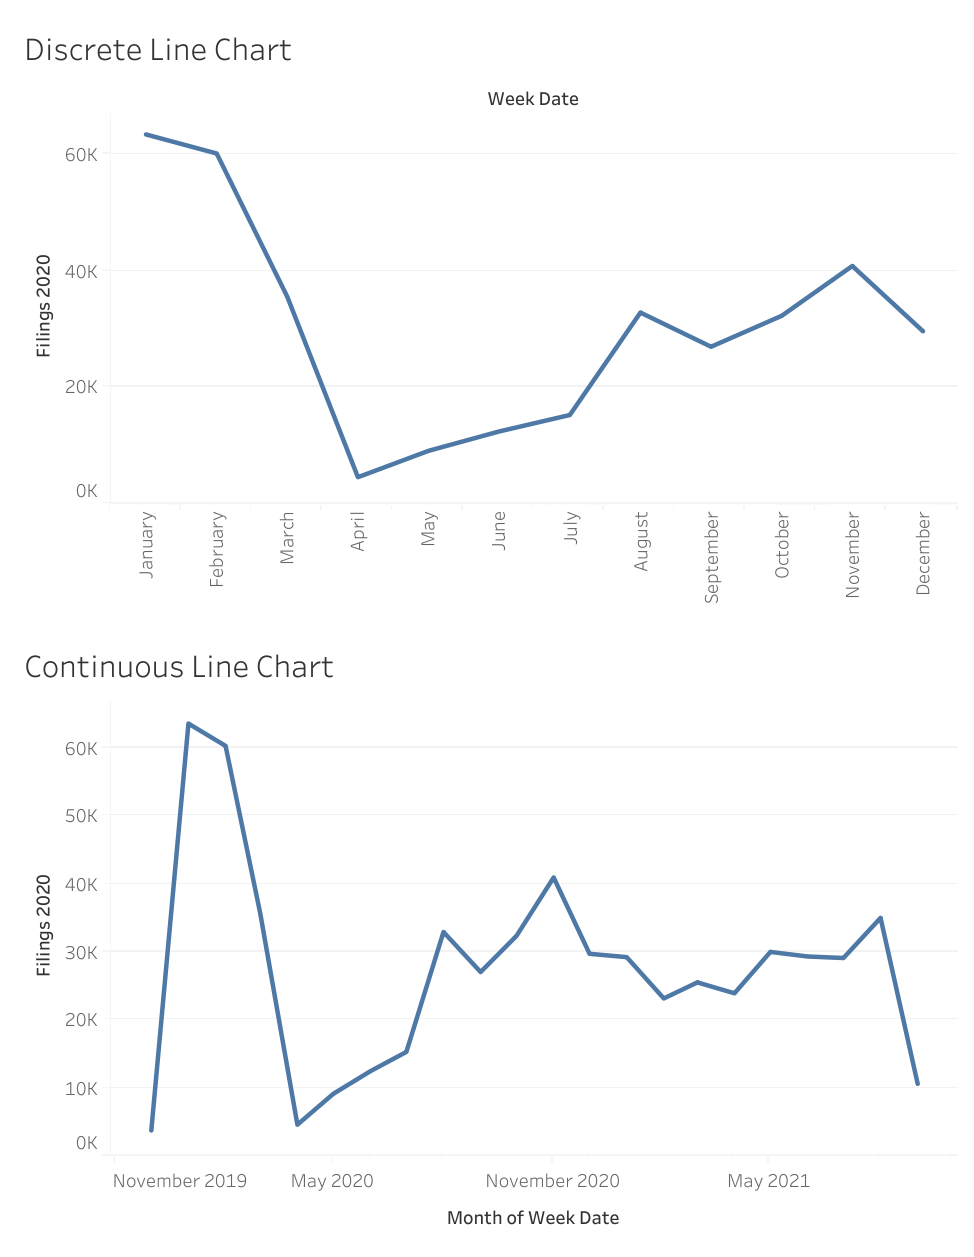 Dashboard using Eviction Lab data, comparing a discrete line chart (top) with a continuous chart (bottom) for eviction filings per month between 2020 and present.